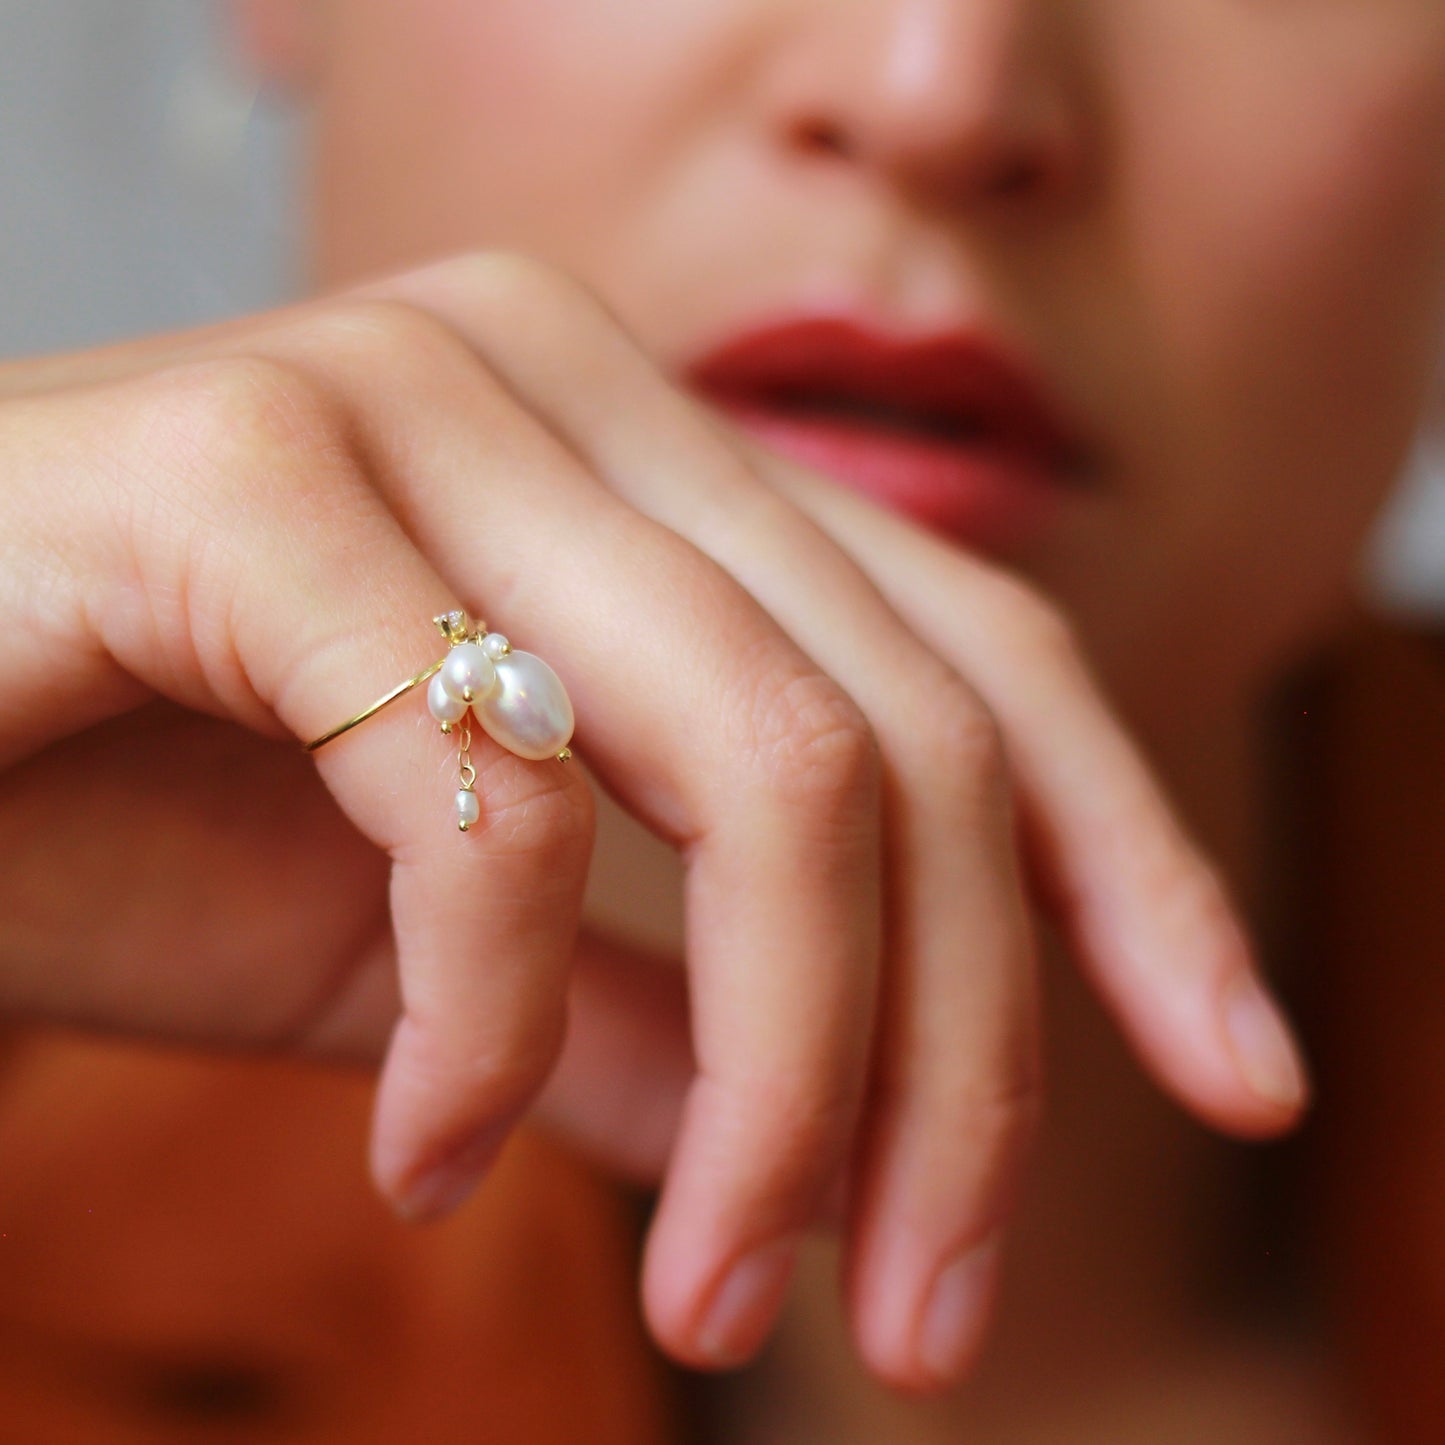 18ct yellow gold ring from our Snowdrop Pearl collection has white oval shaped fresh water pearls, mixed fine chain hanging detail along with a diamond set charm on model